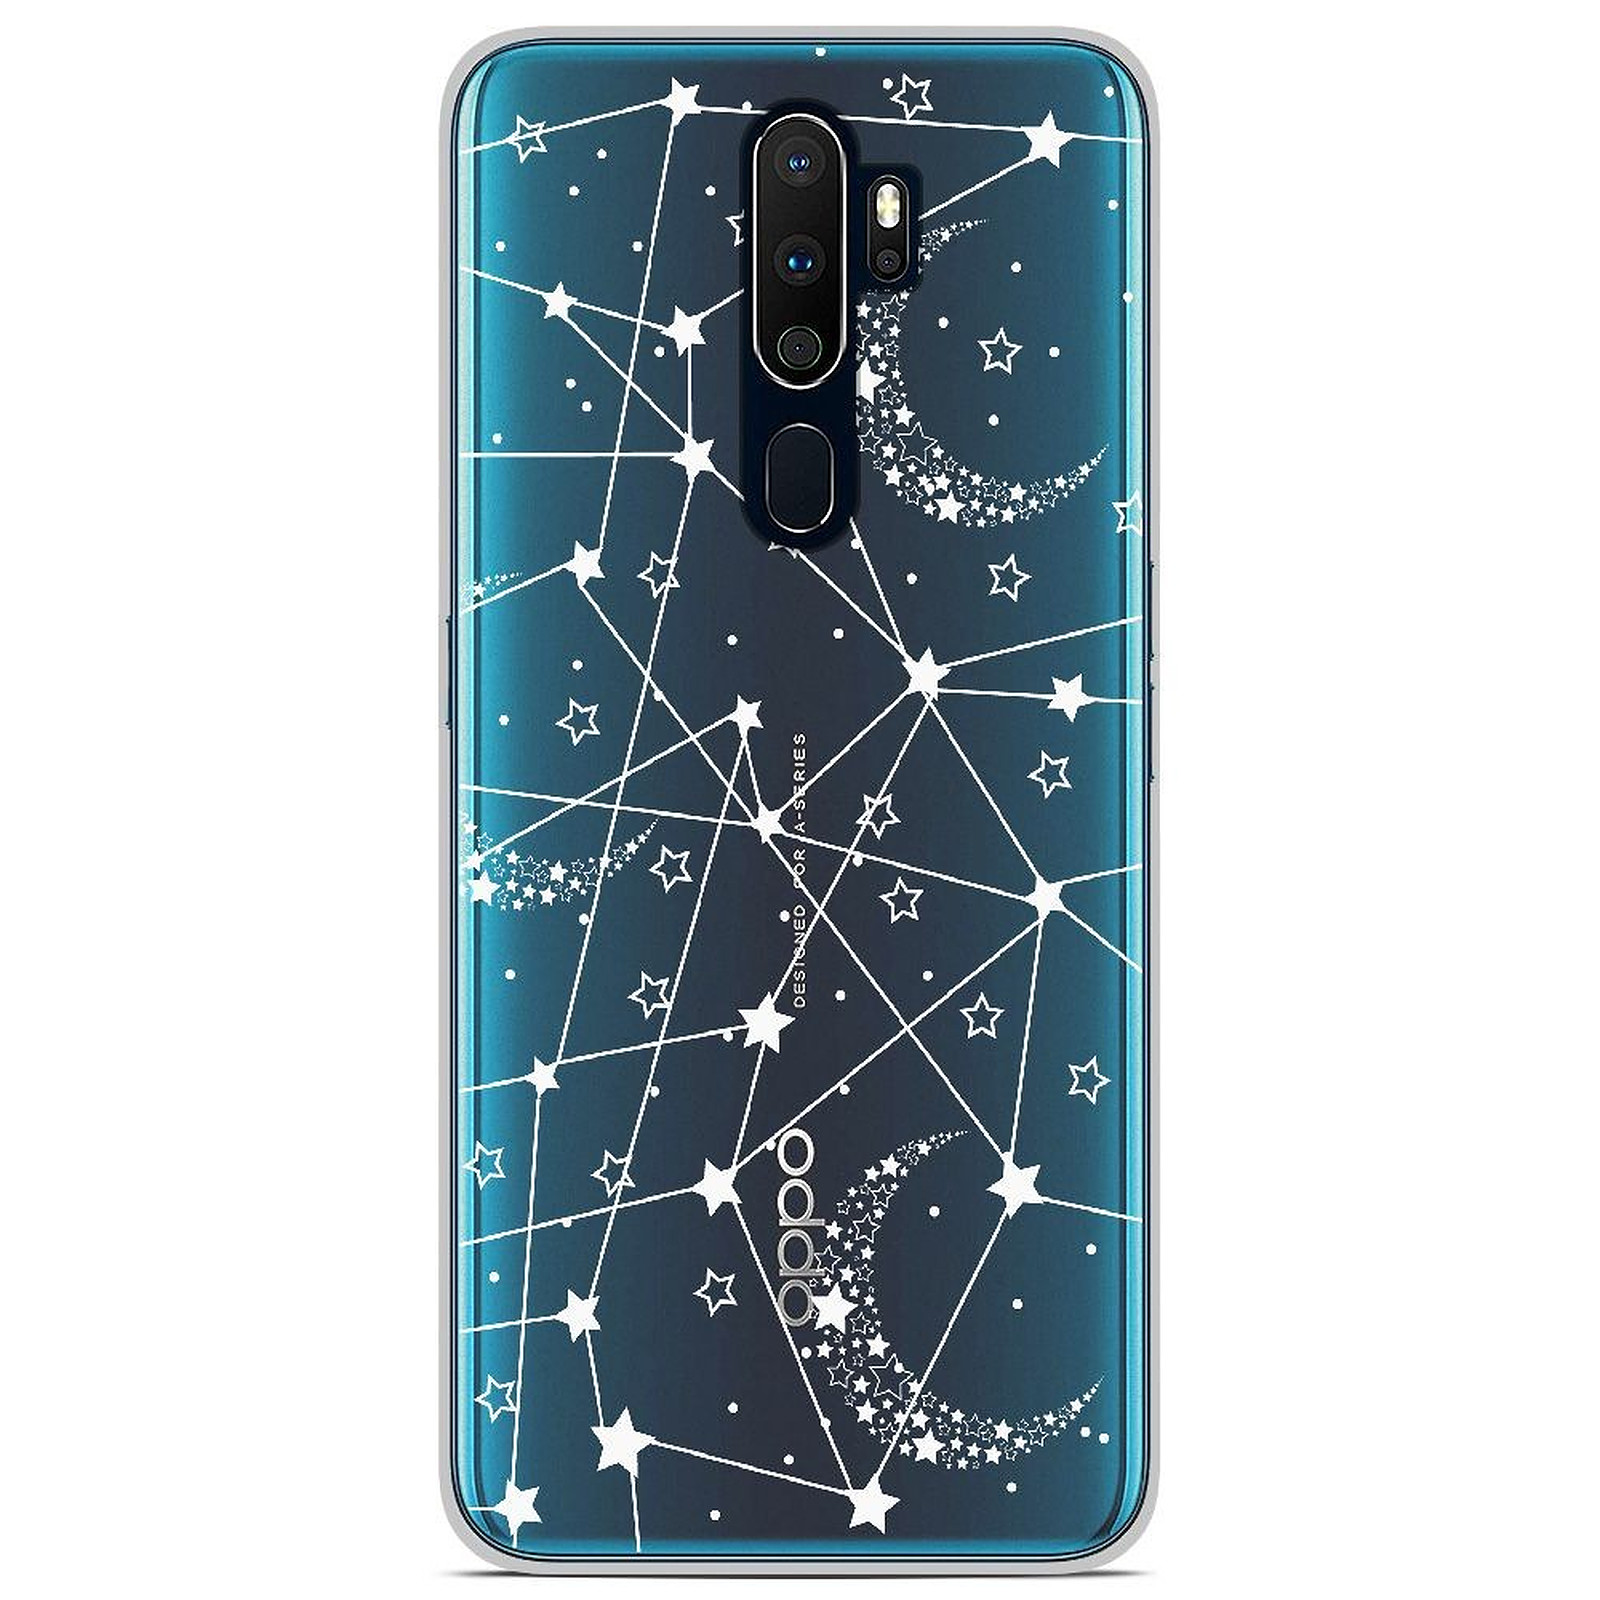 1001 Coques Coque silicone gel Oppo A5 2020 motif Lignes etoilees - Coque telephone 1001Coques